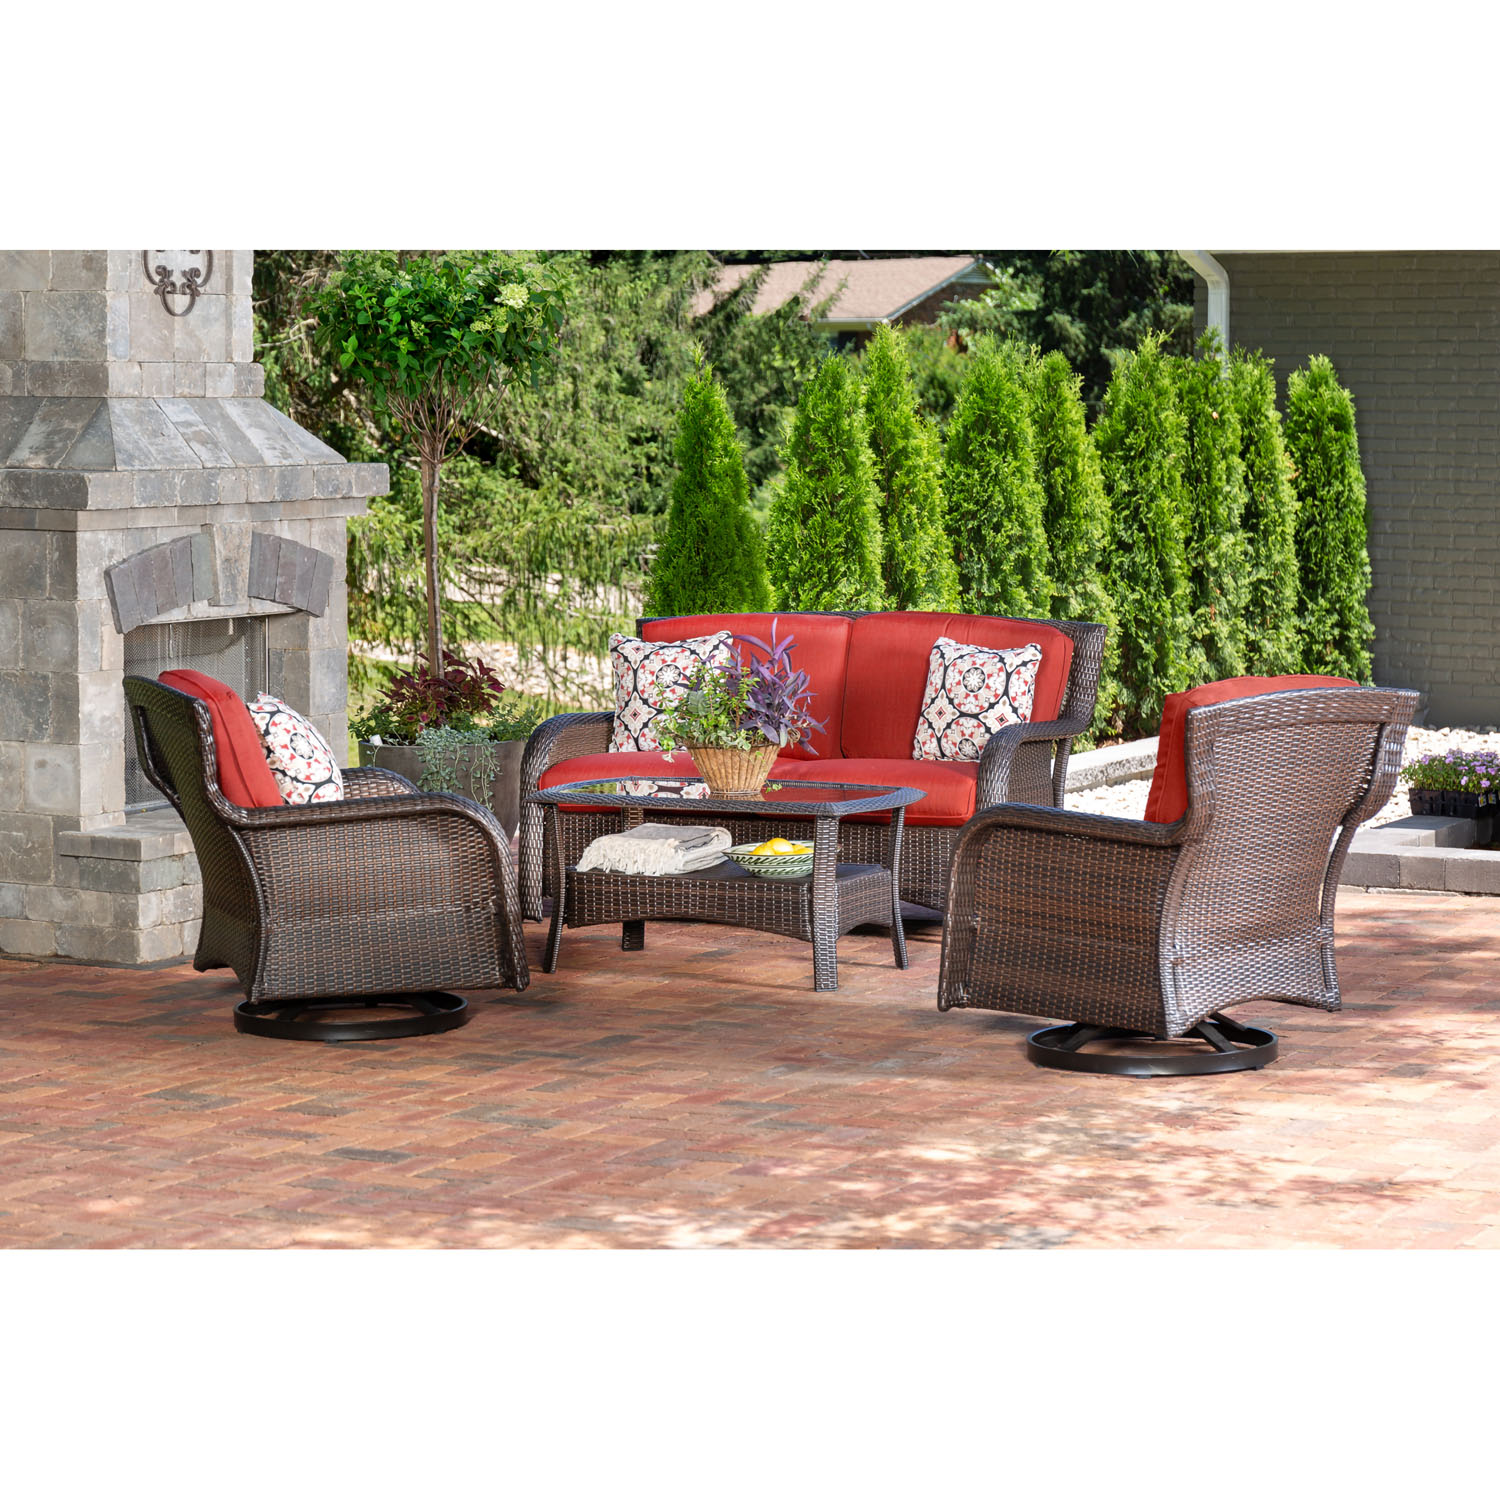 Hanover Strathmere 4-Piece Wicker and Steel Outdoor Conversation Set, Crimson Red - image 3 of 12